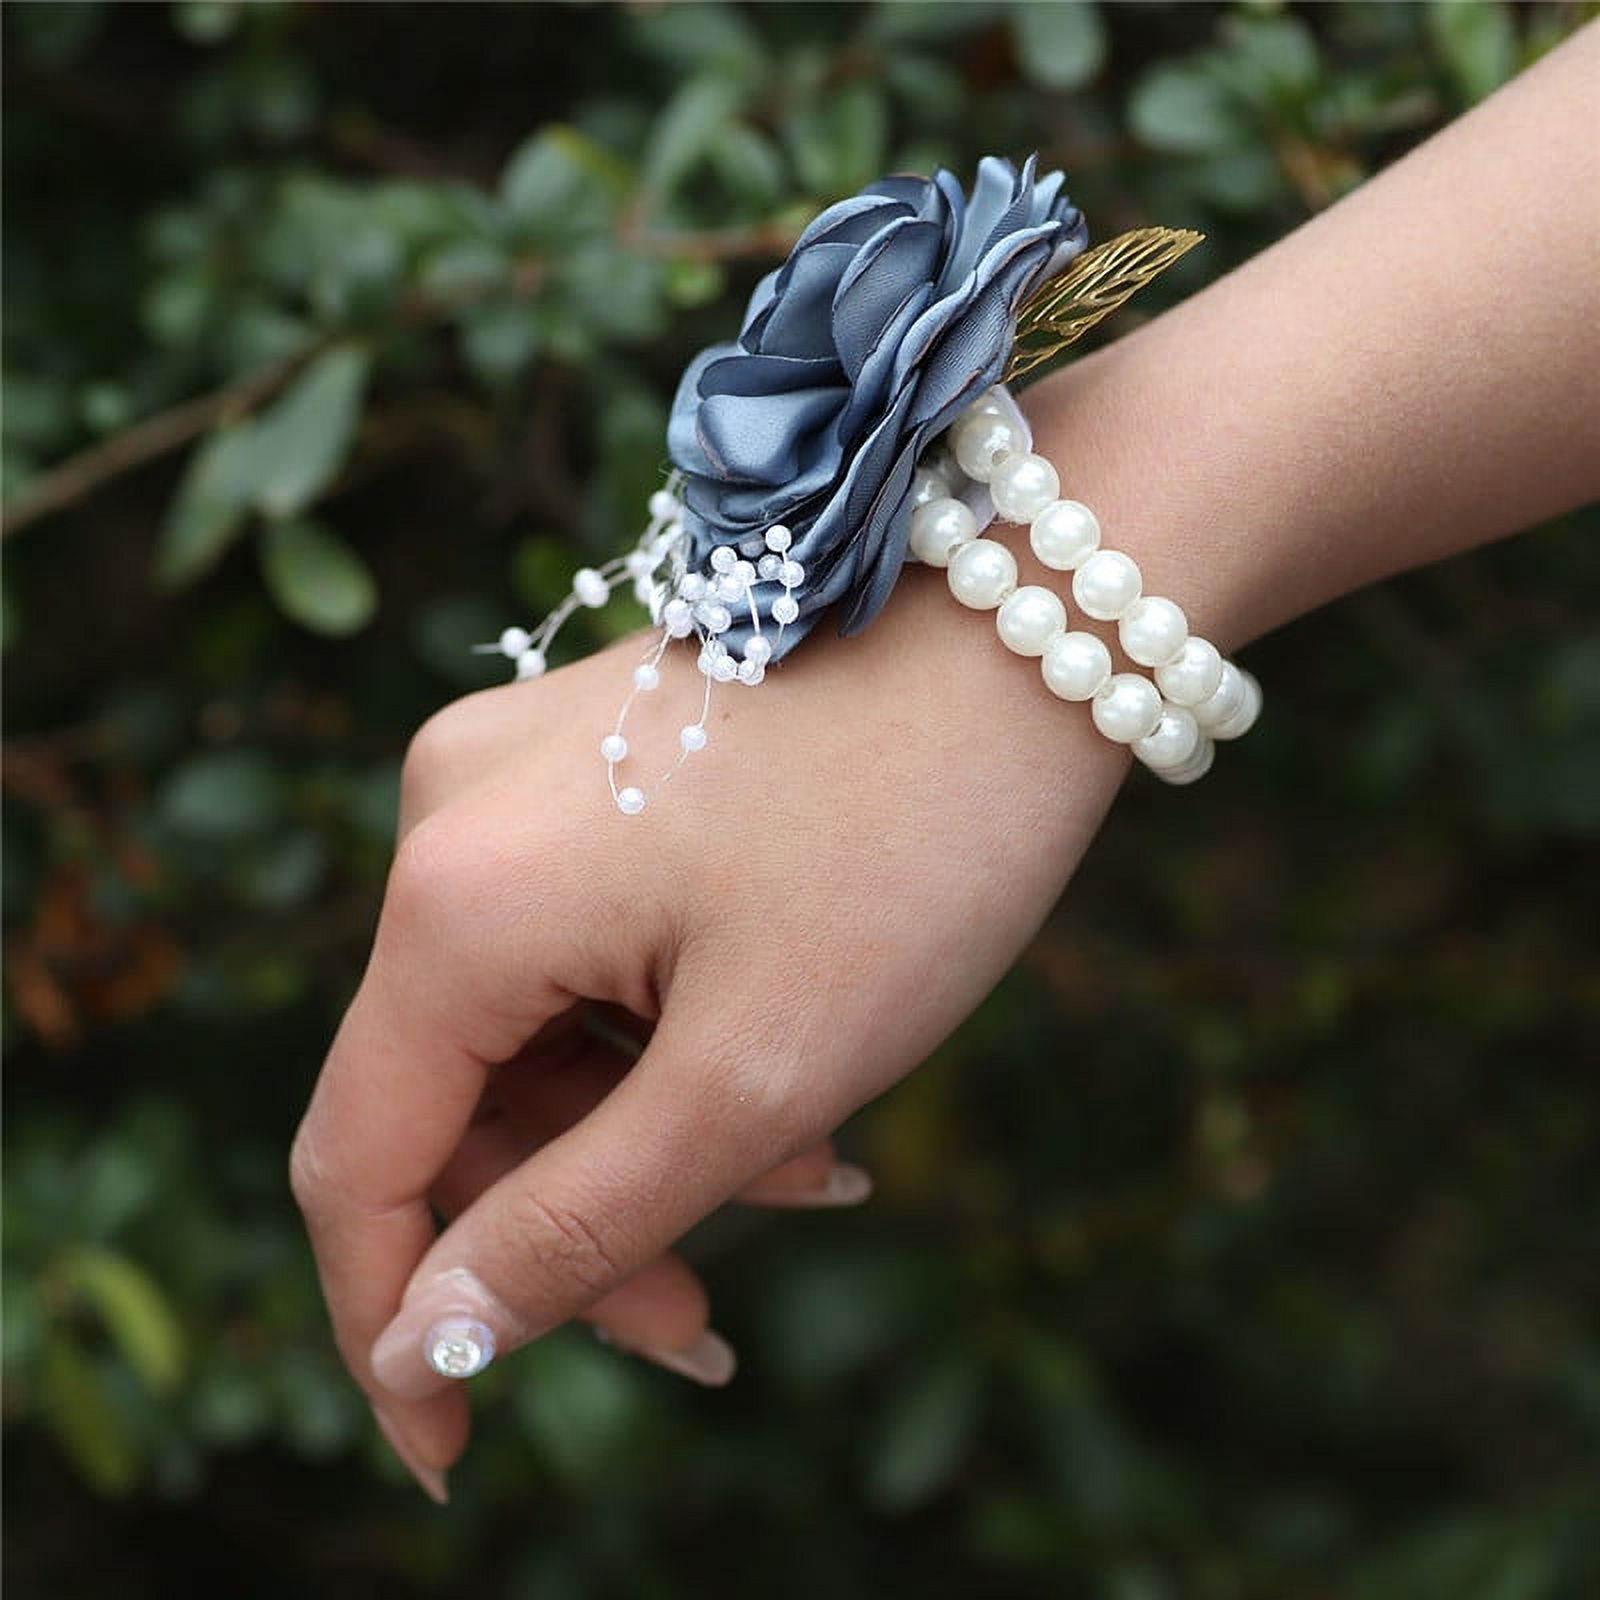 Bridesmaid corsage + bracelet for party or prom 